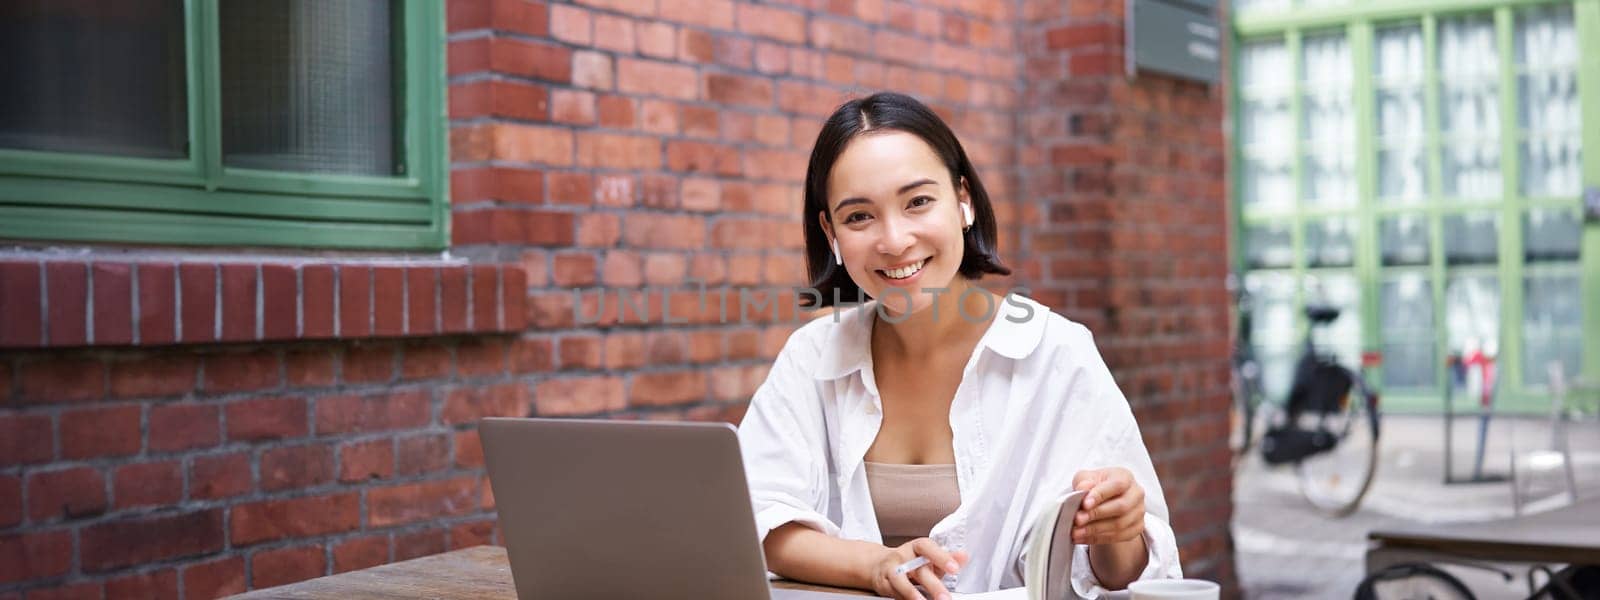 Working woman sitting in coworking space, drinking coffee and using laptop, wearing wireless headphones, watching video and smiling.